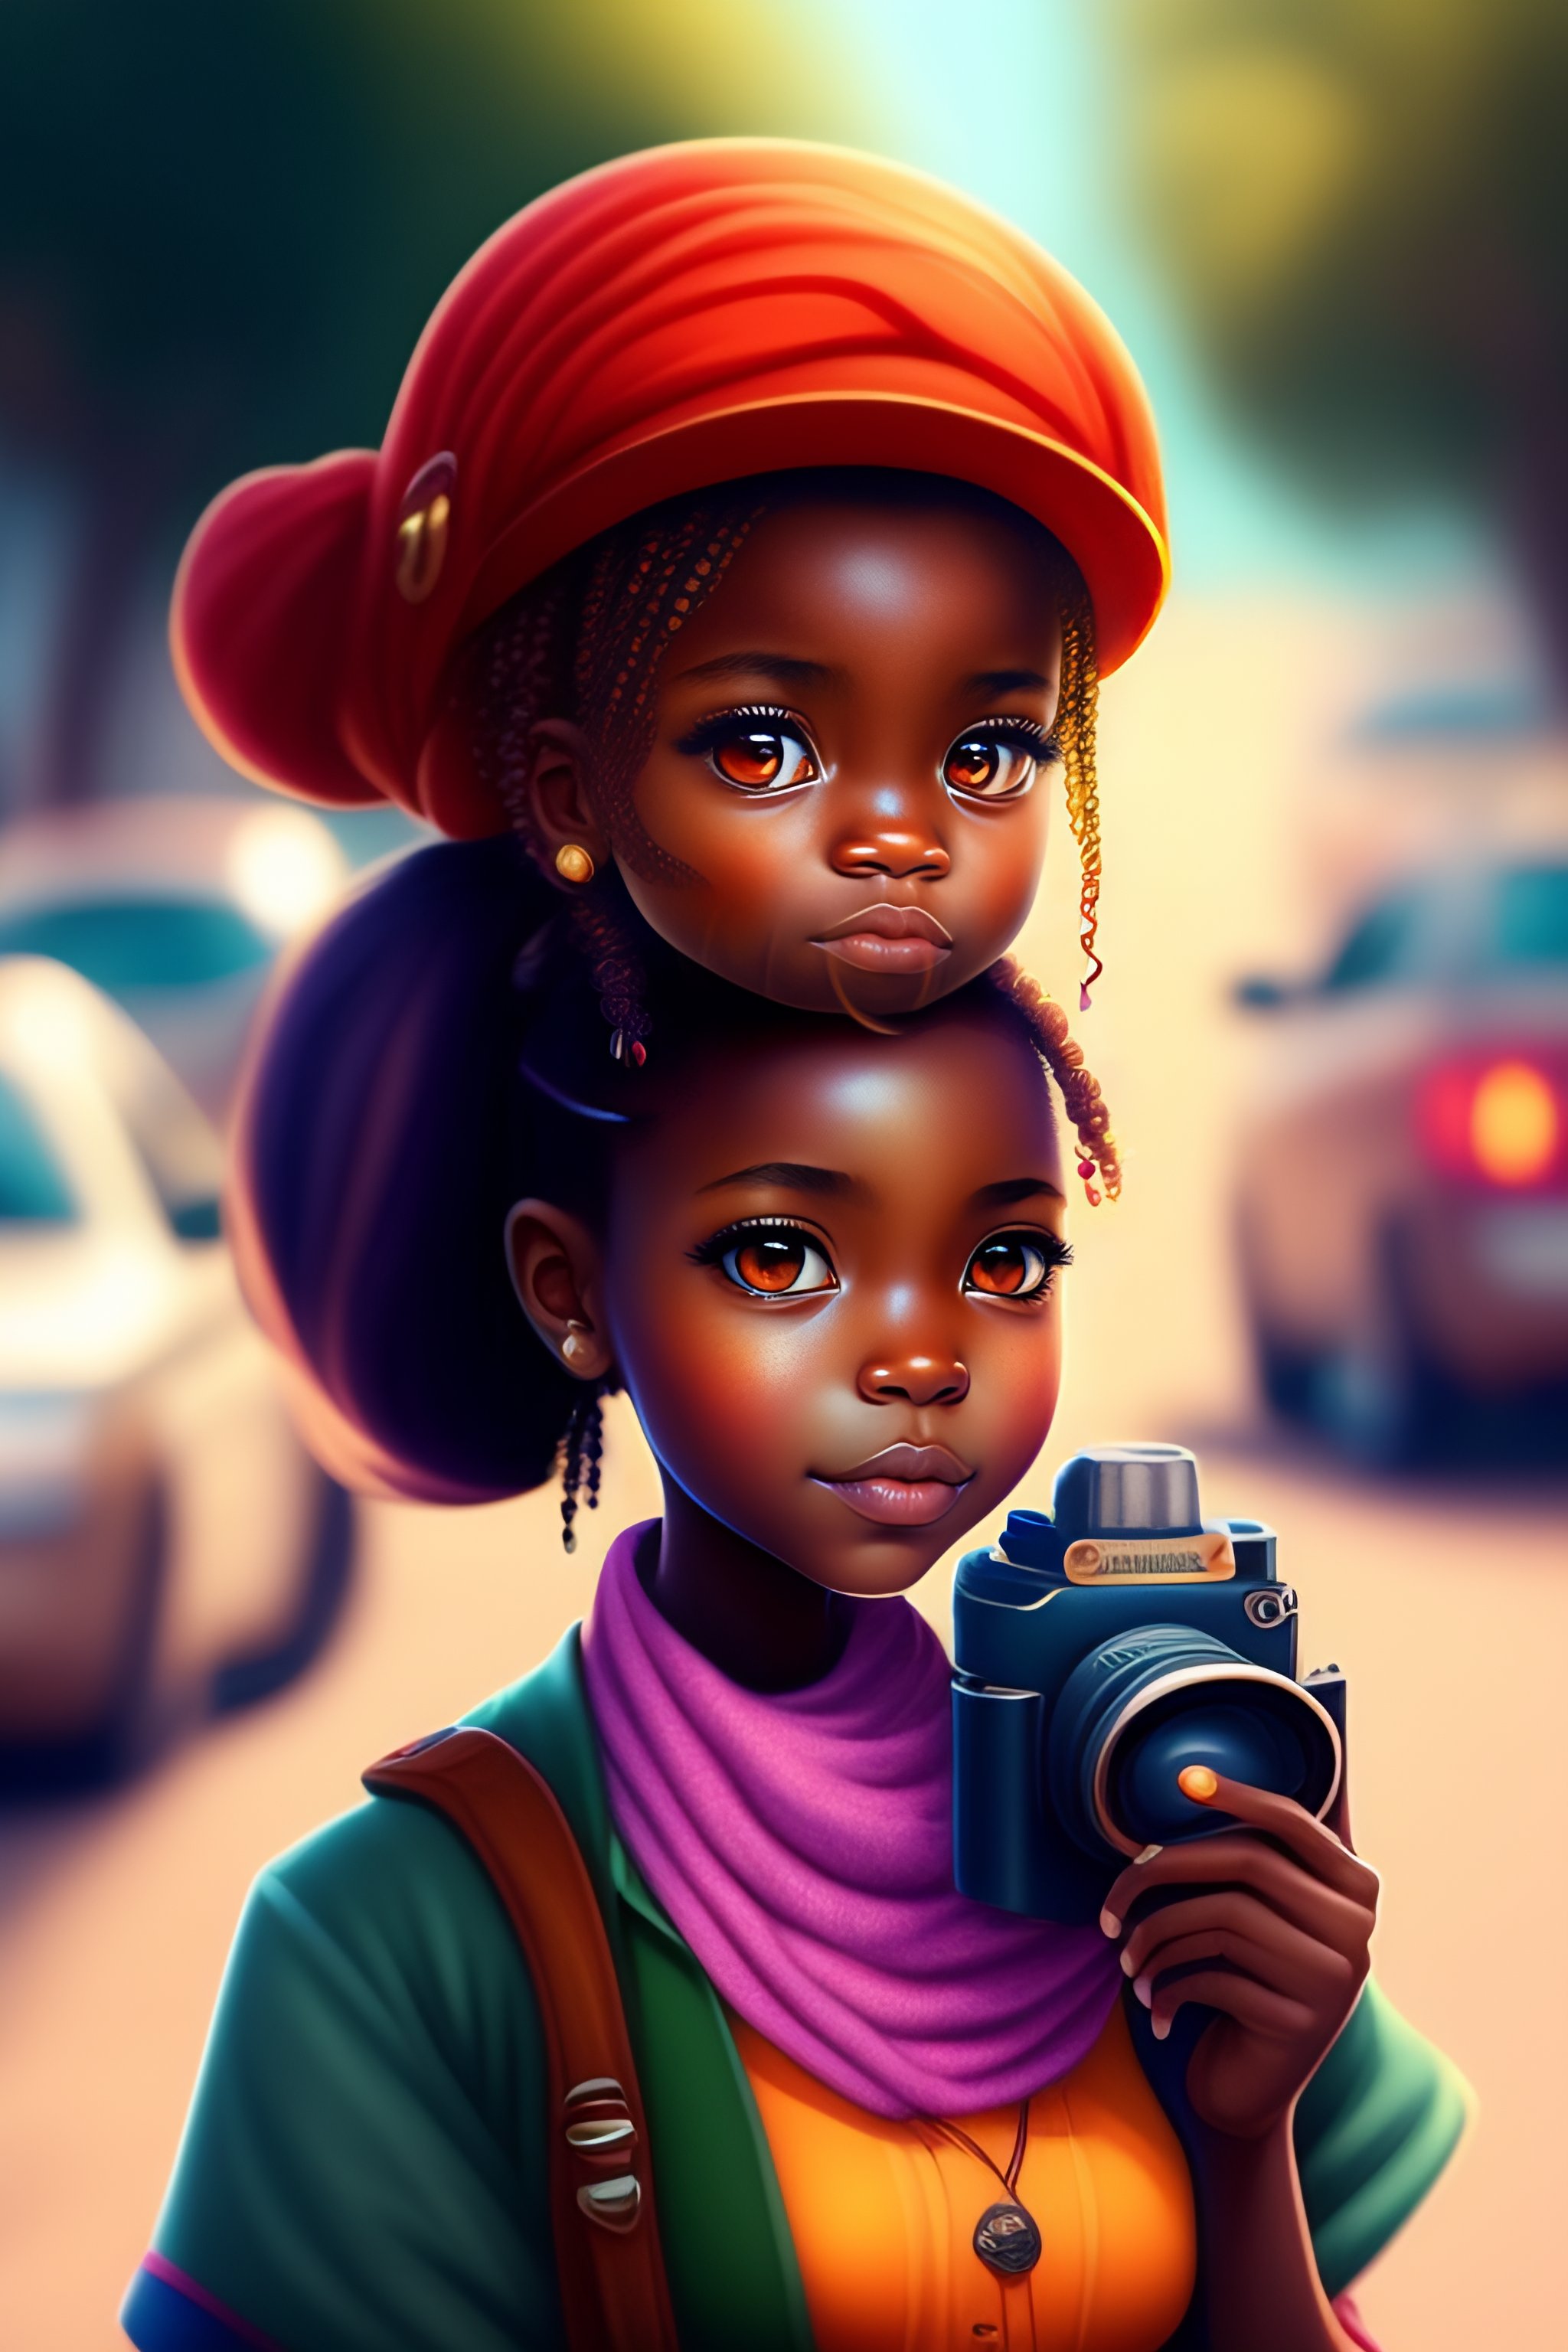 Lexica Anime Version Ofa Cute African Girl Holding A Camera In Africa Street Sassy Funny 